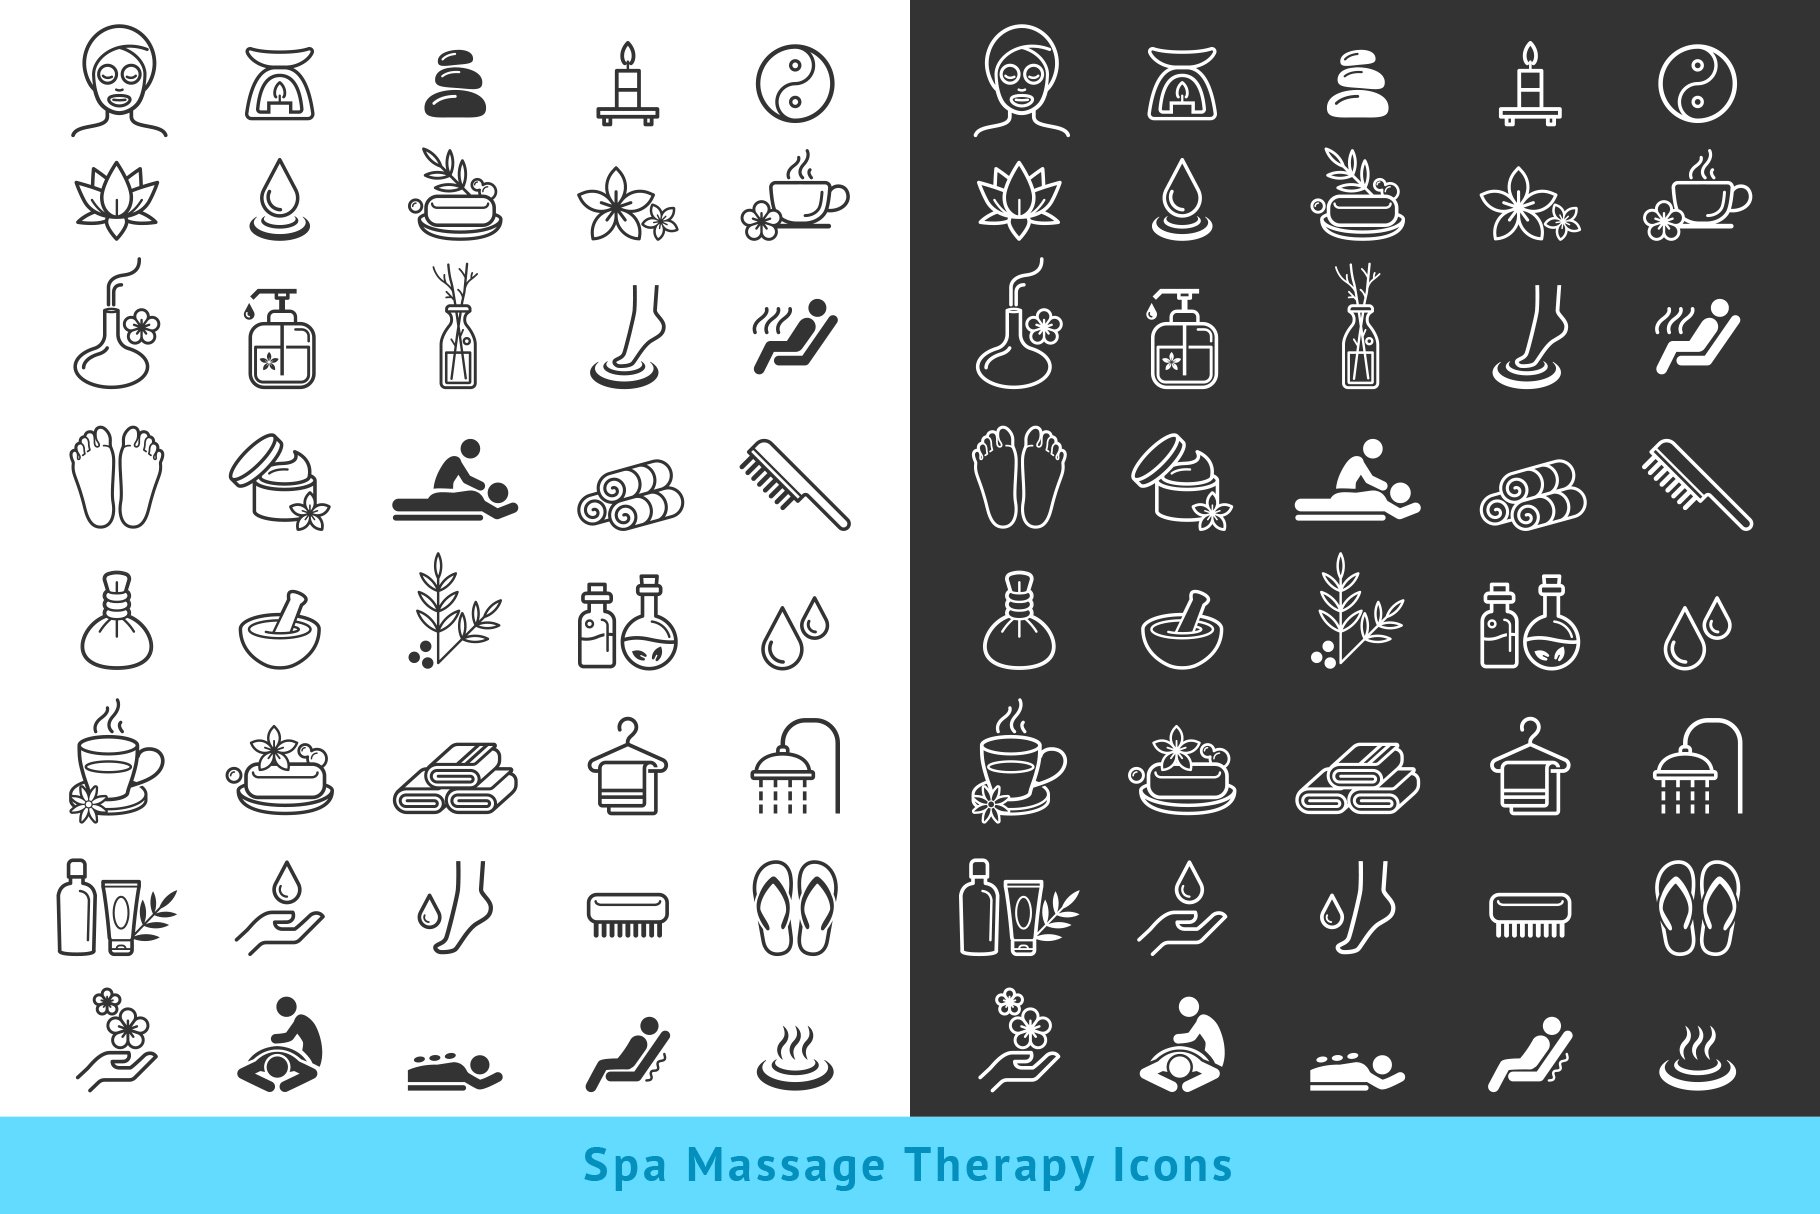 Spa Massage Therapy Cosmetics Icons. cover image.